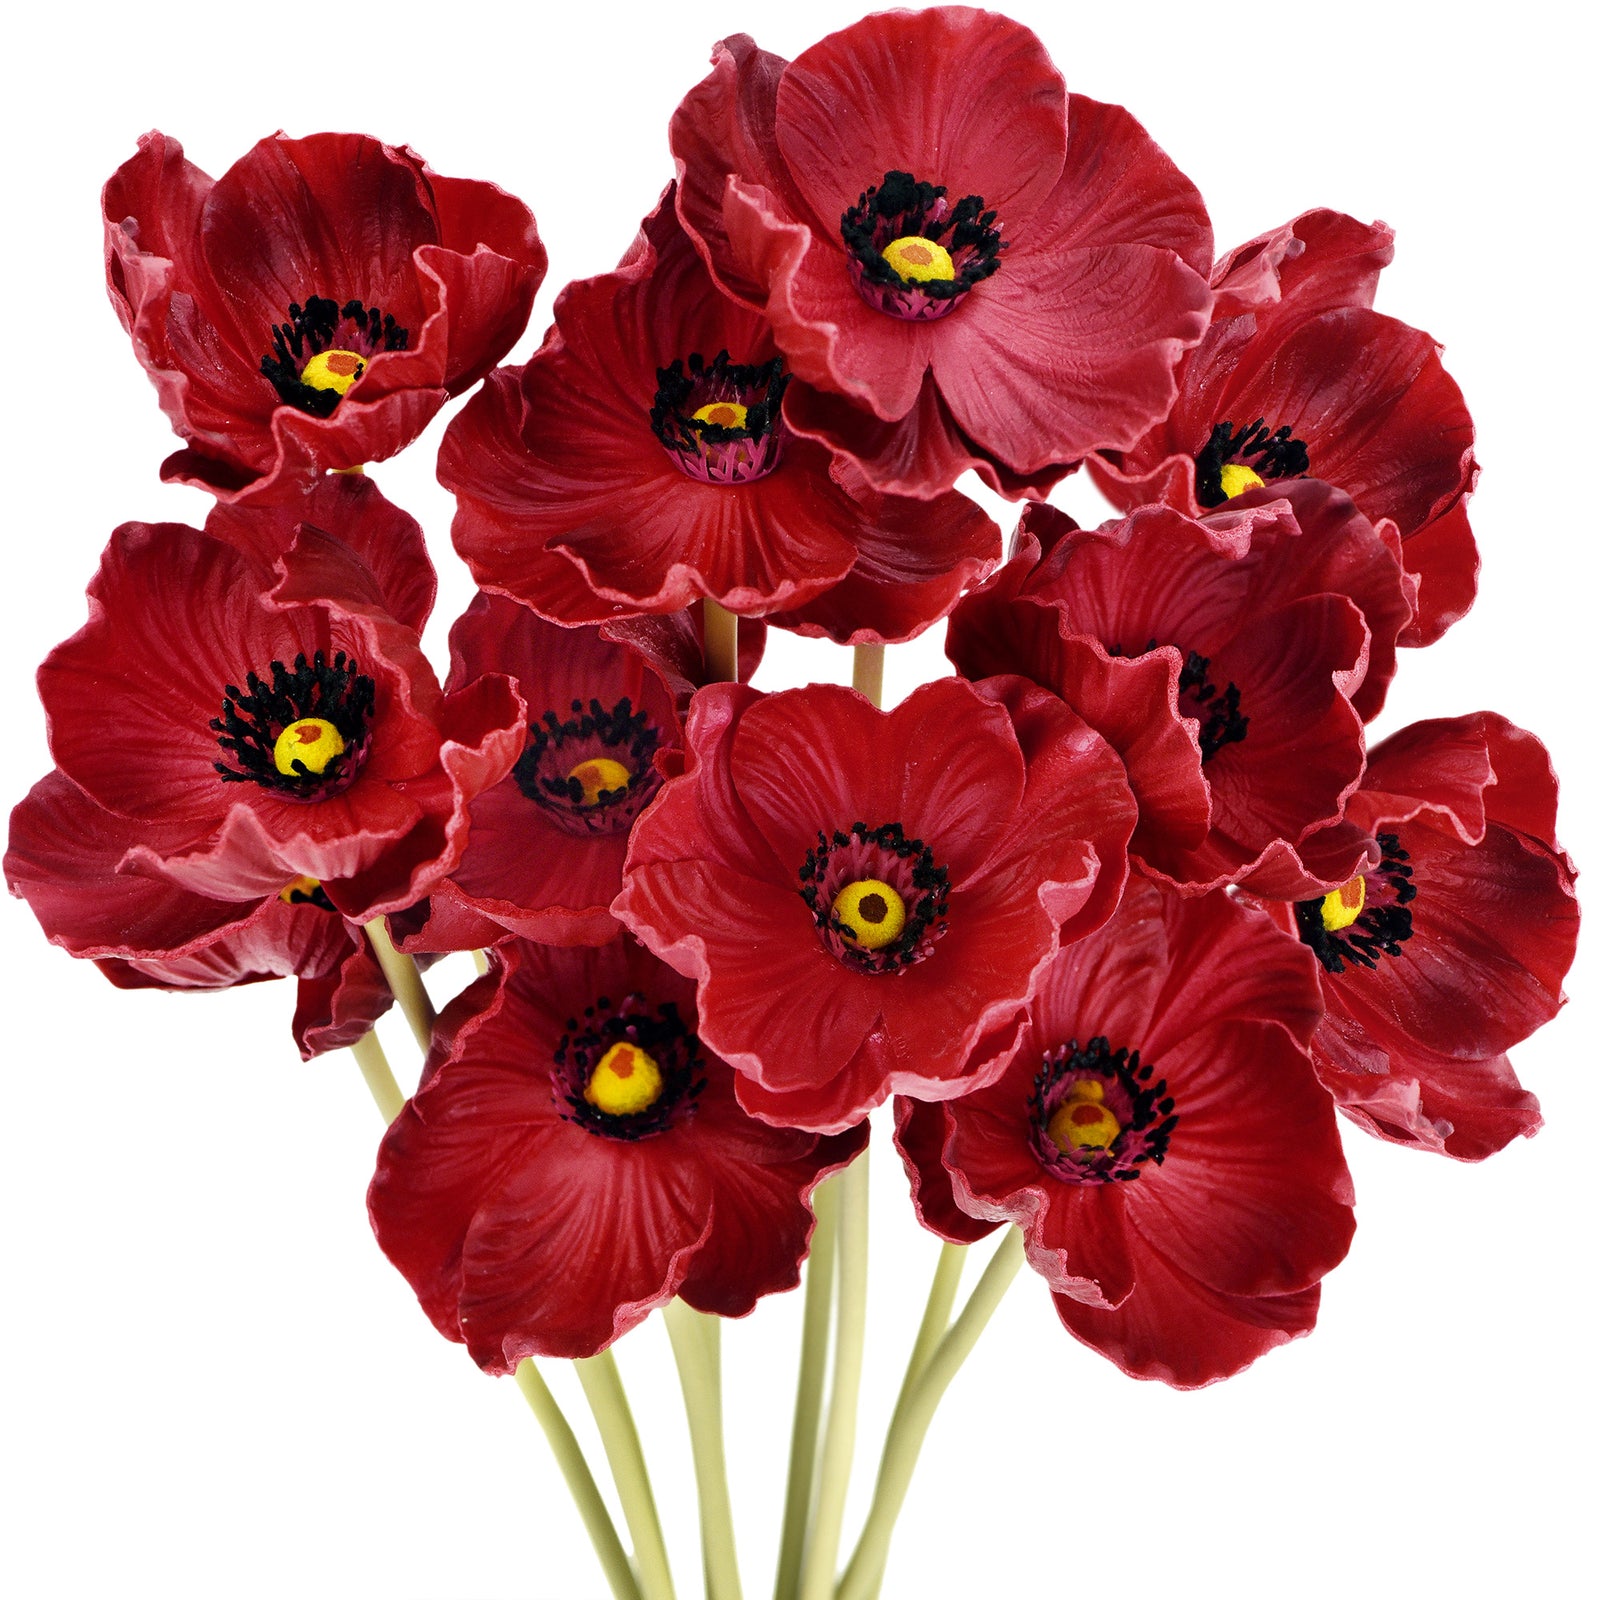 FiveSeasonStuff Red Real Touch Artificial Poppy Flowers Remembrance Day Decorations 10 Stems 12.6'' (32cm)